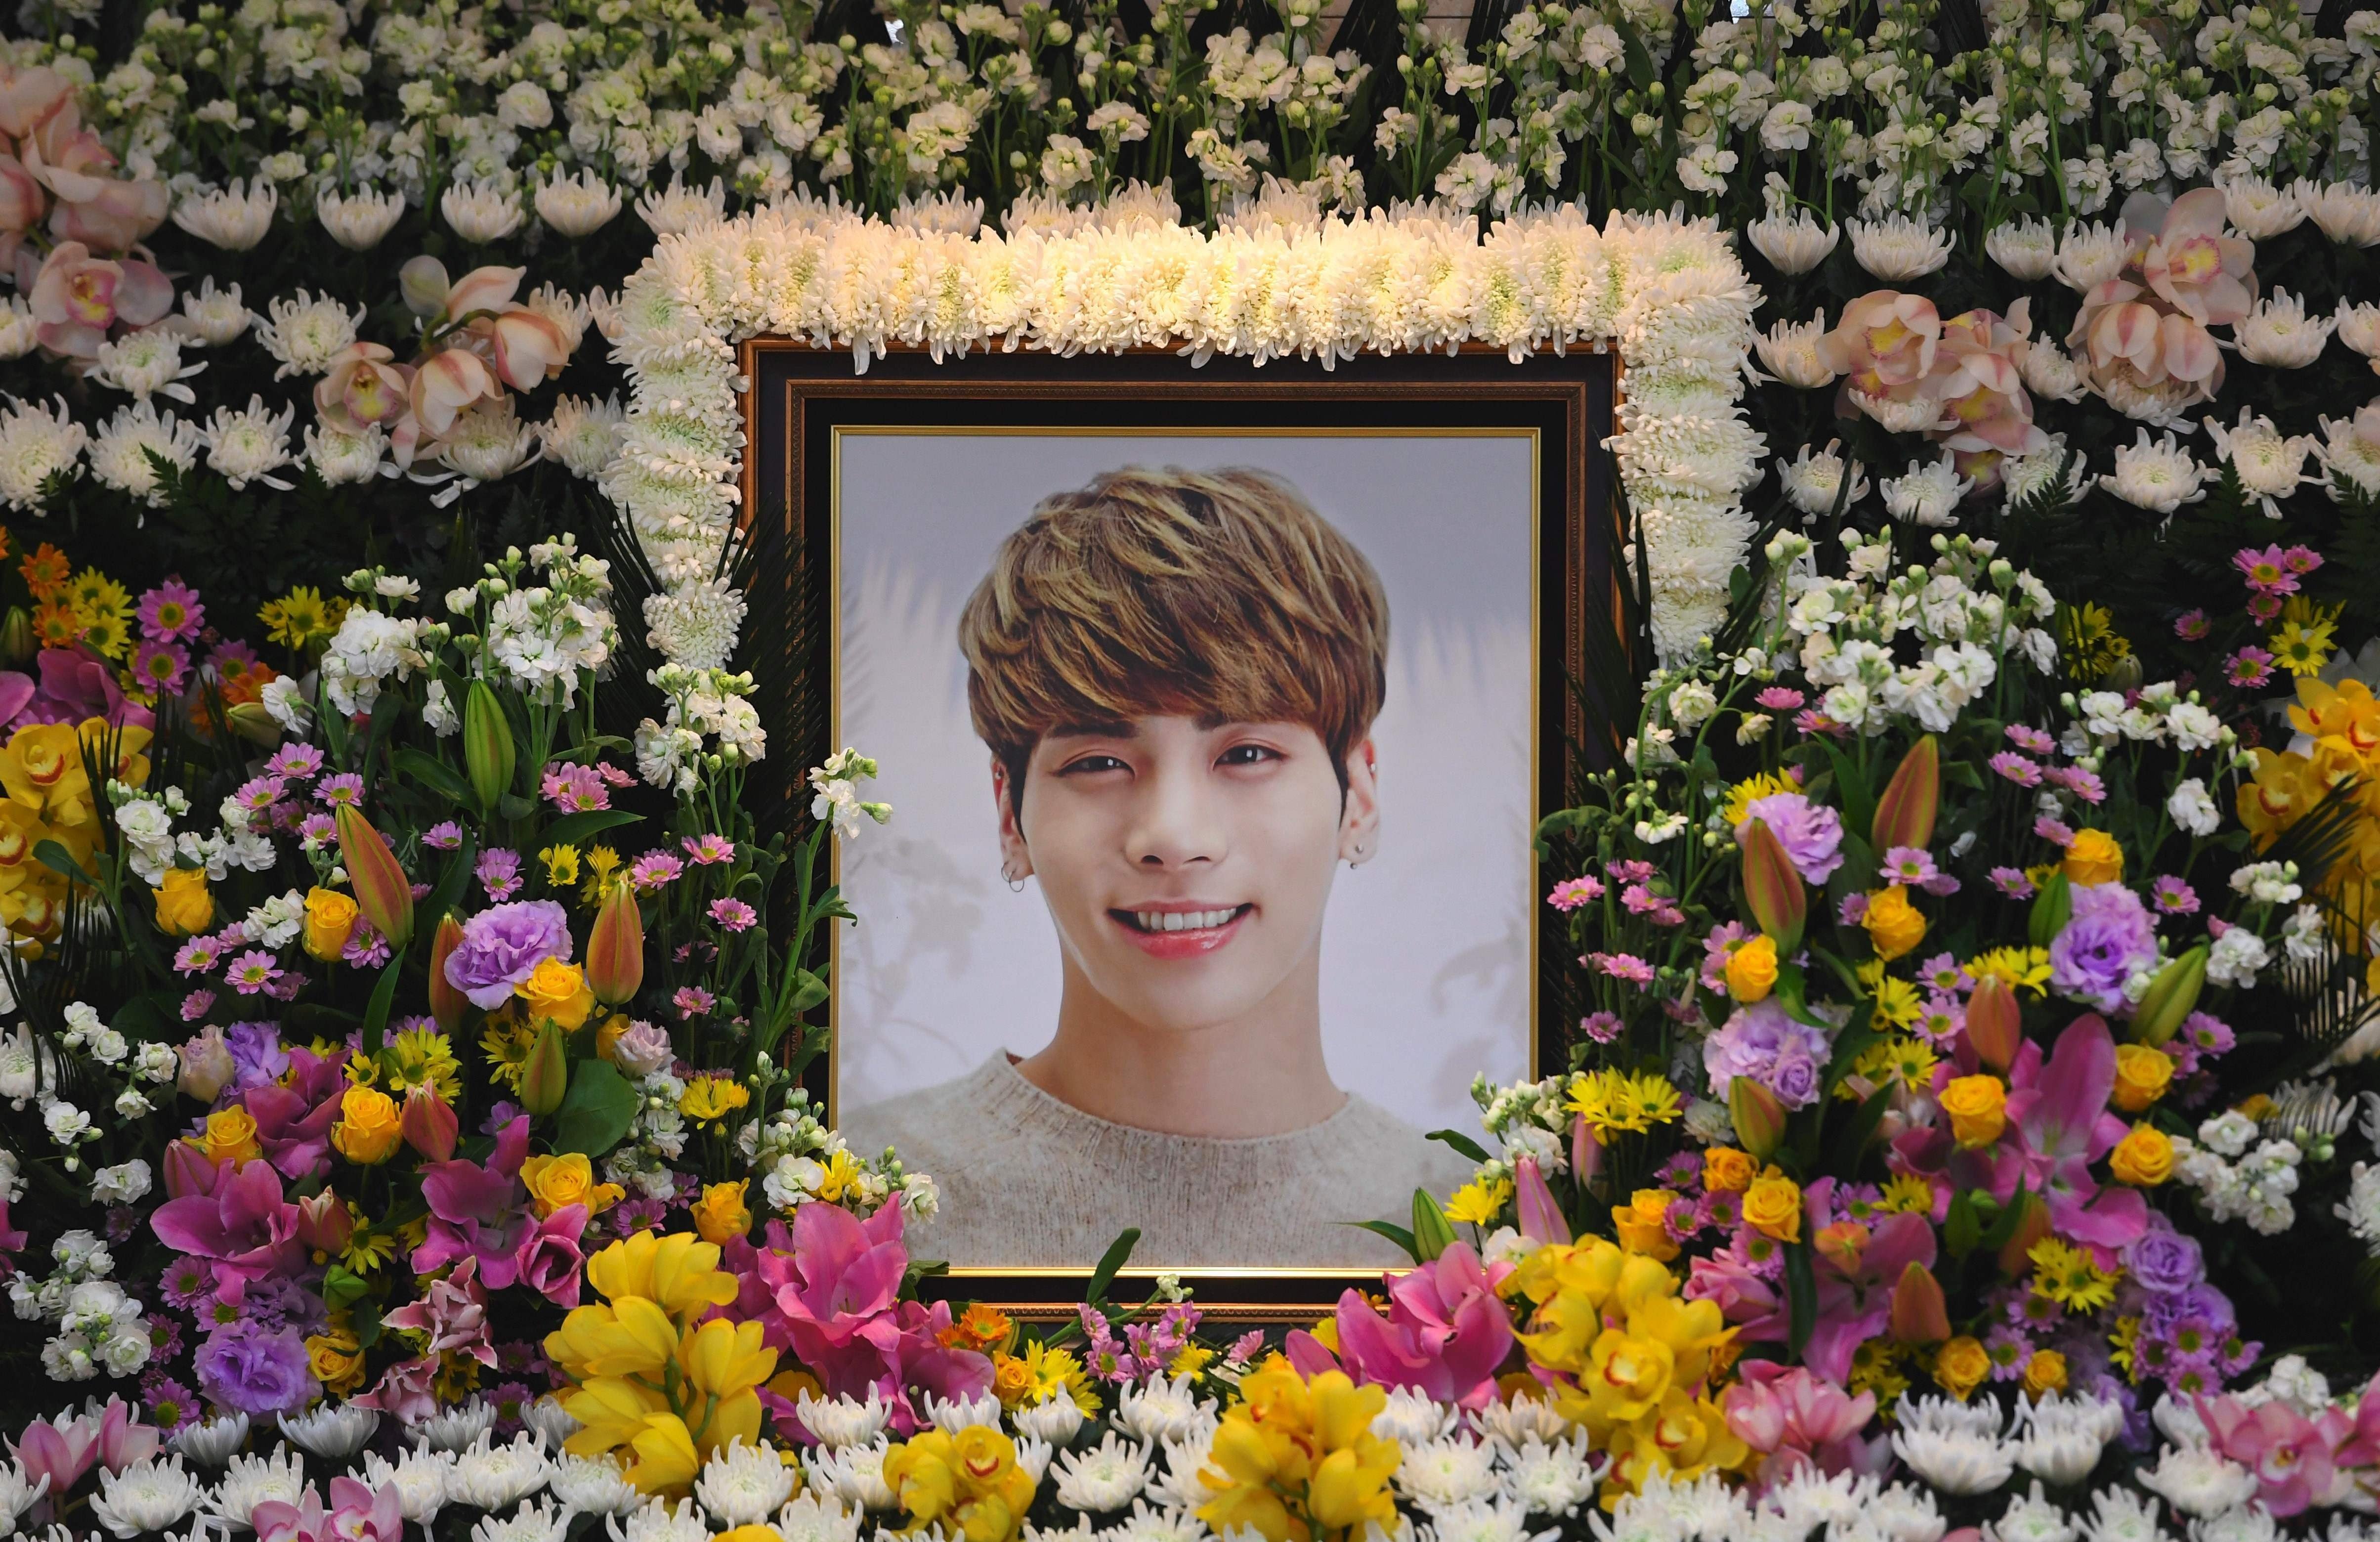 Two years after his death, the passing of Kim Jong-hyun has taken added poignancy following two new sudden deaths in the world of K-pop, Sulli and Goo Hara. Photo: AFP